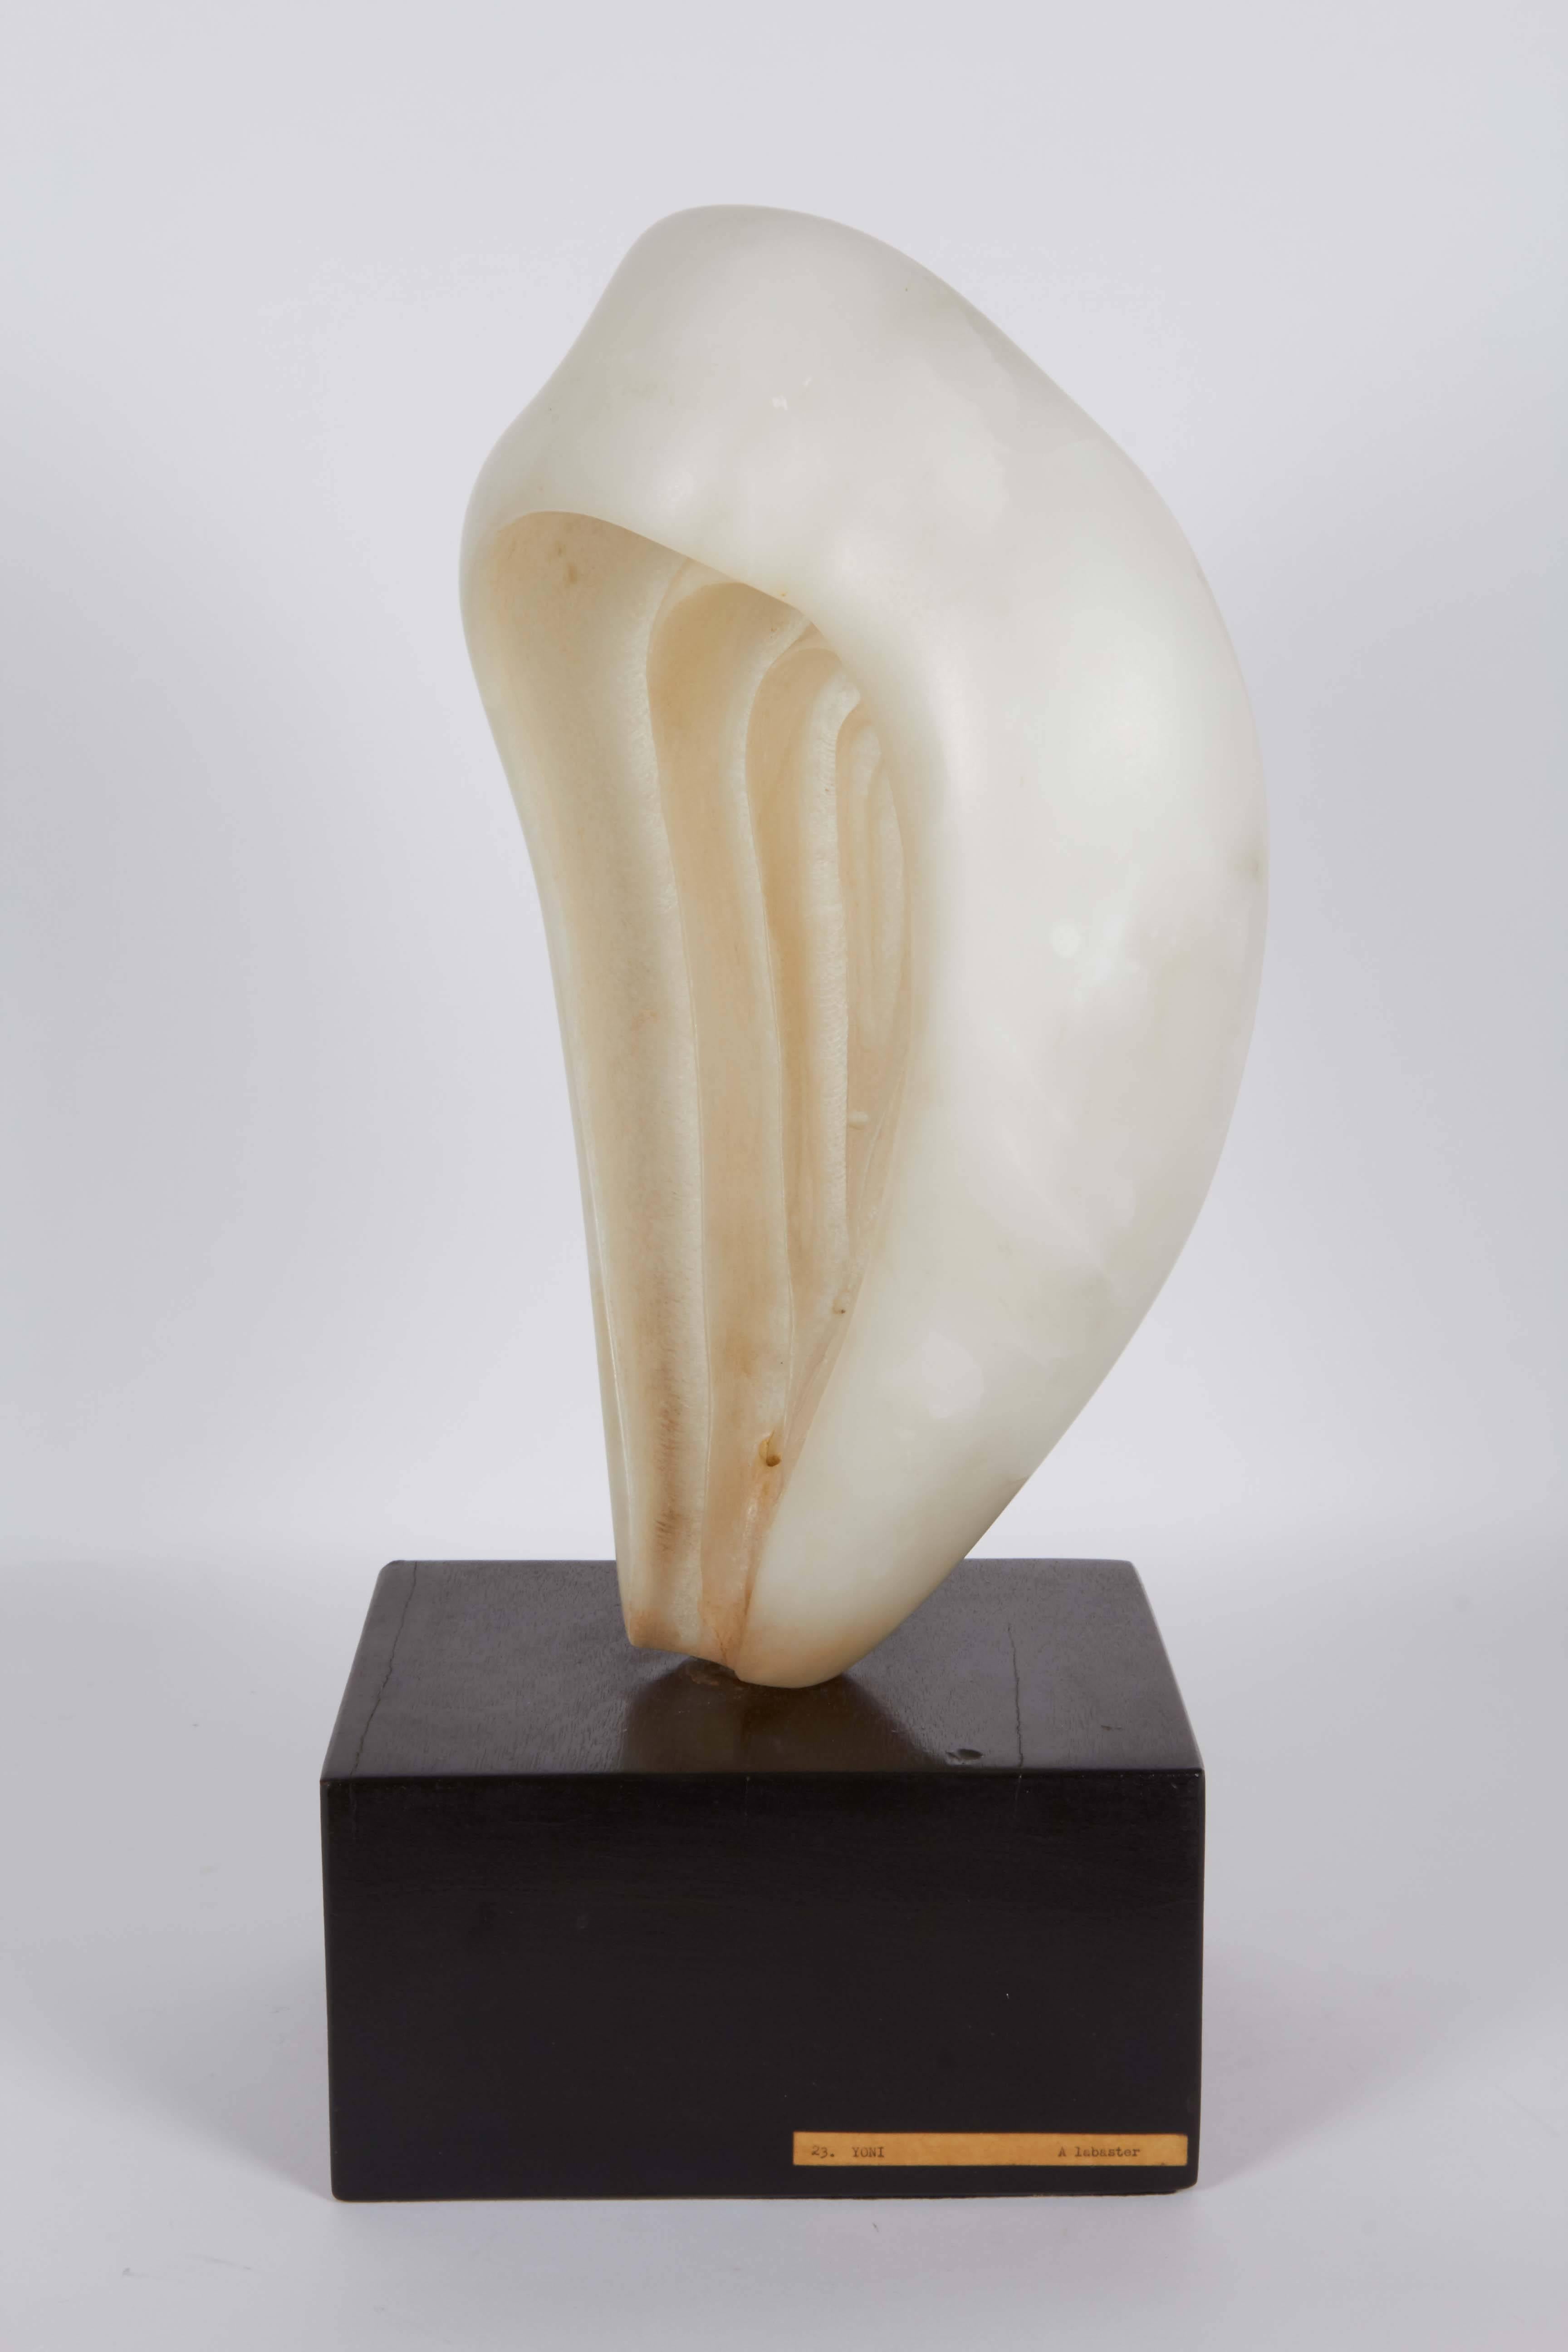 A modern abstract sculpture by an unknown artist, depicting a stylistic yoni symbol, crafted of alabaster, mounted on a rich toned wood base. Markings include a label reading [123. Yoni Alabaster] affixed to the base. Very good overall condition,